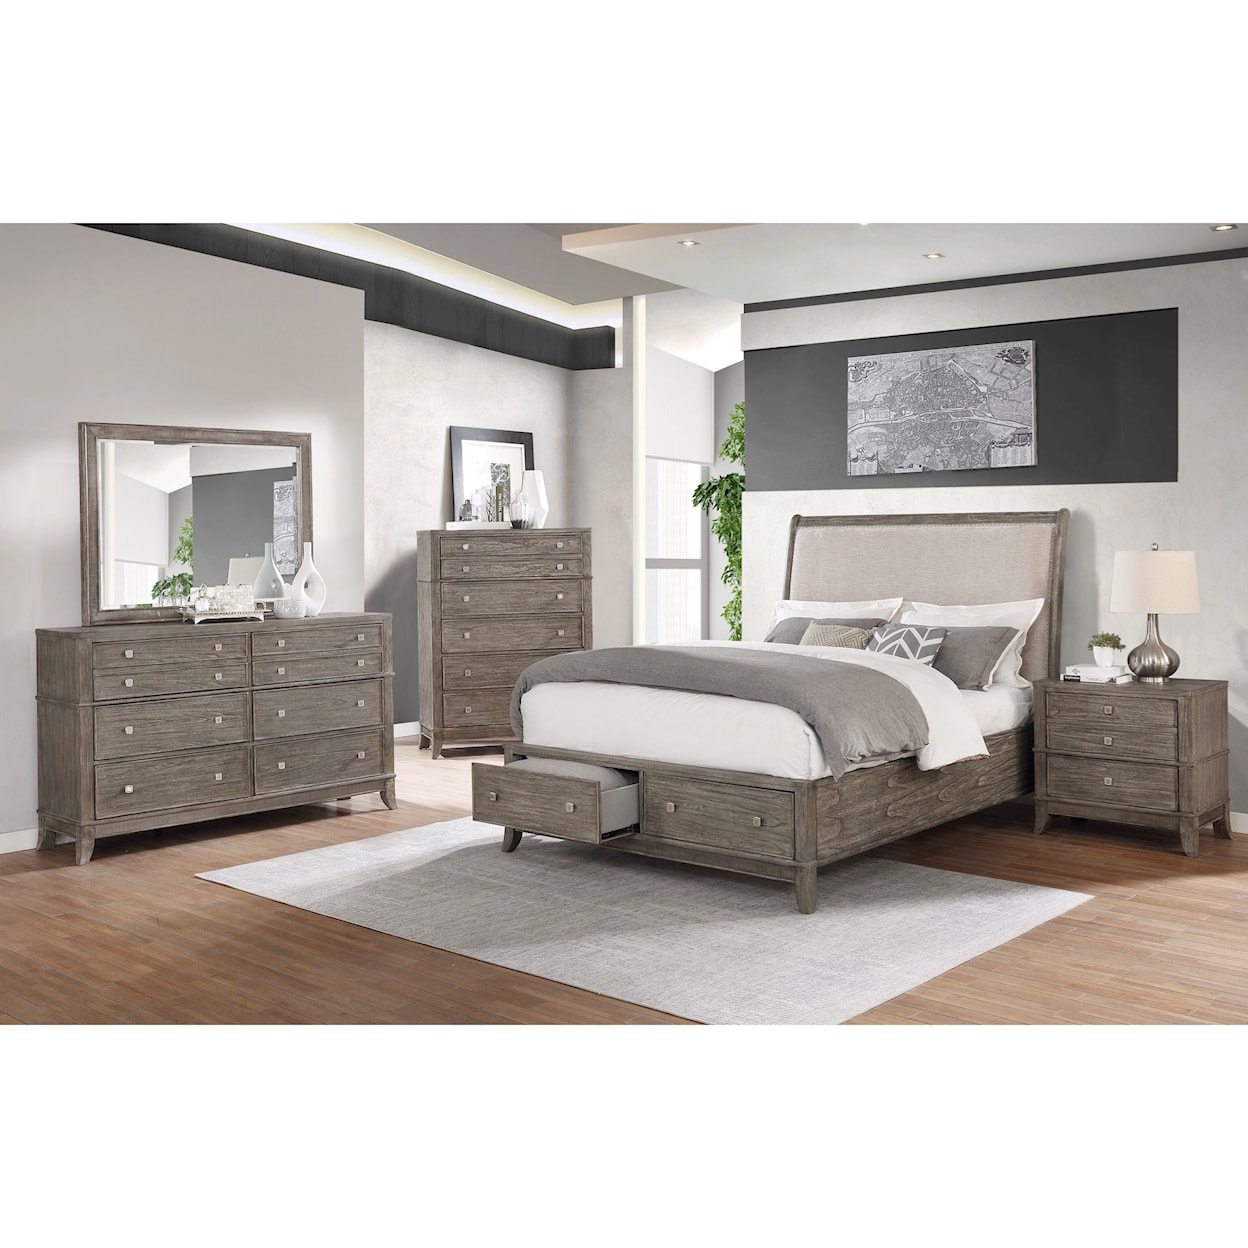 Avalon Furniture B00193 Queen Bedroom Group